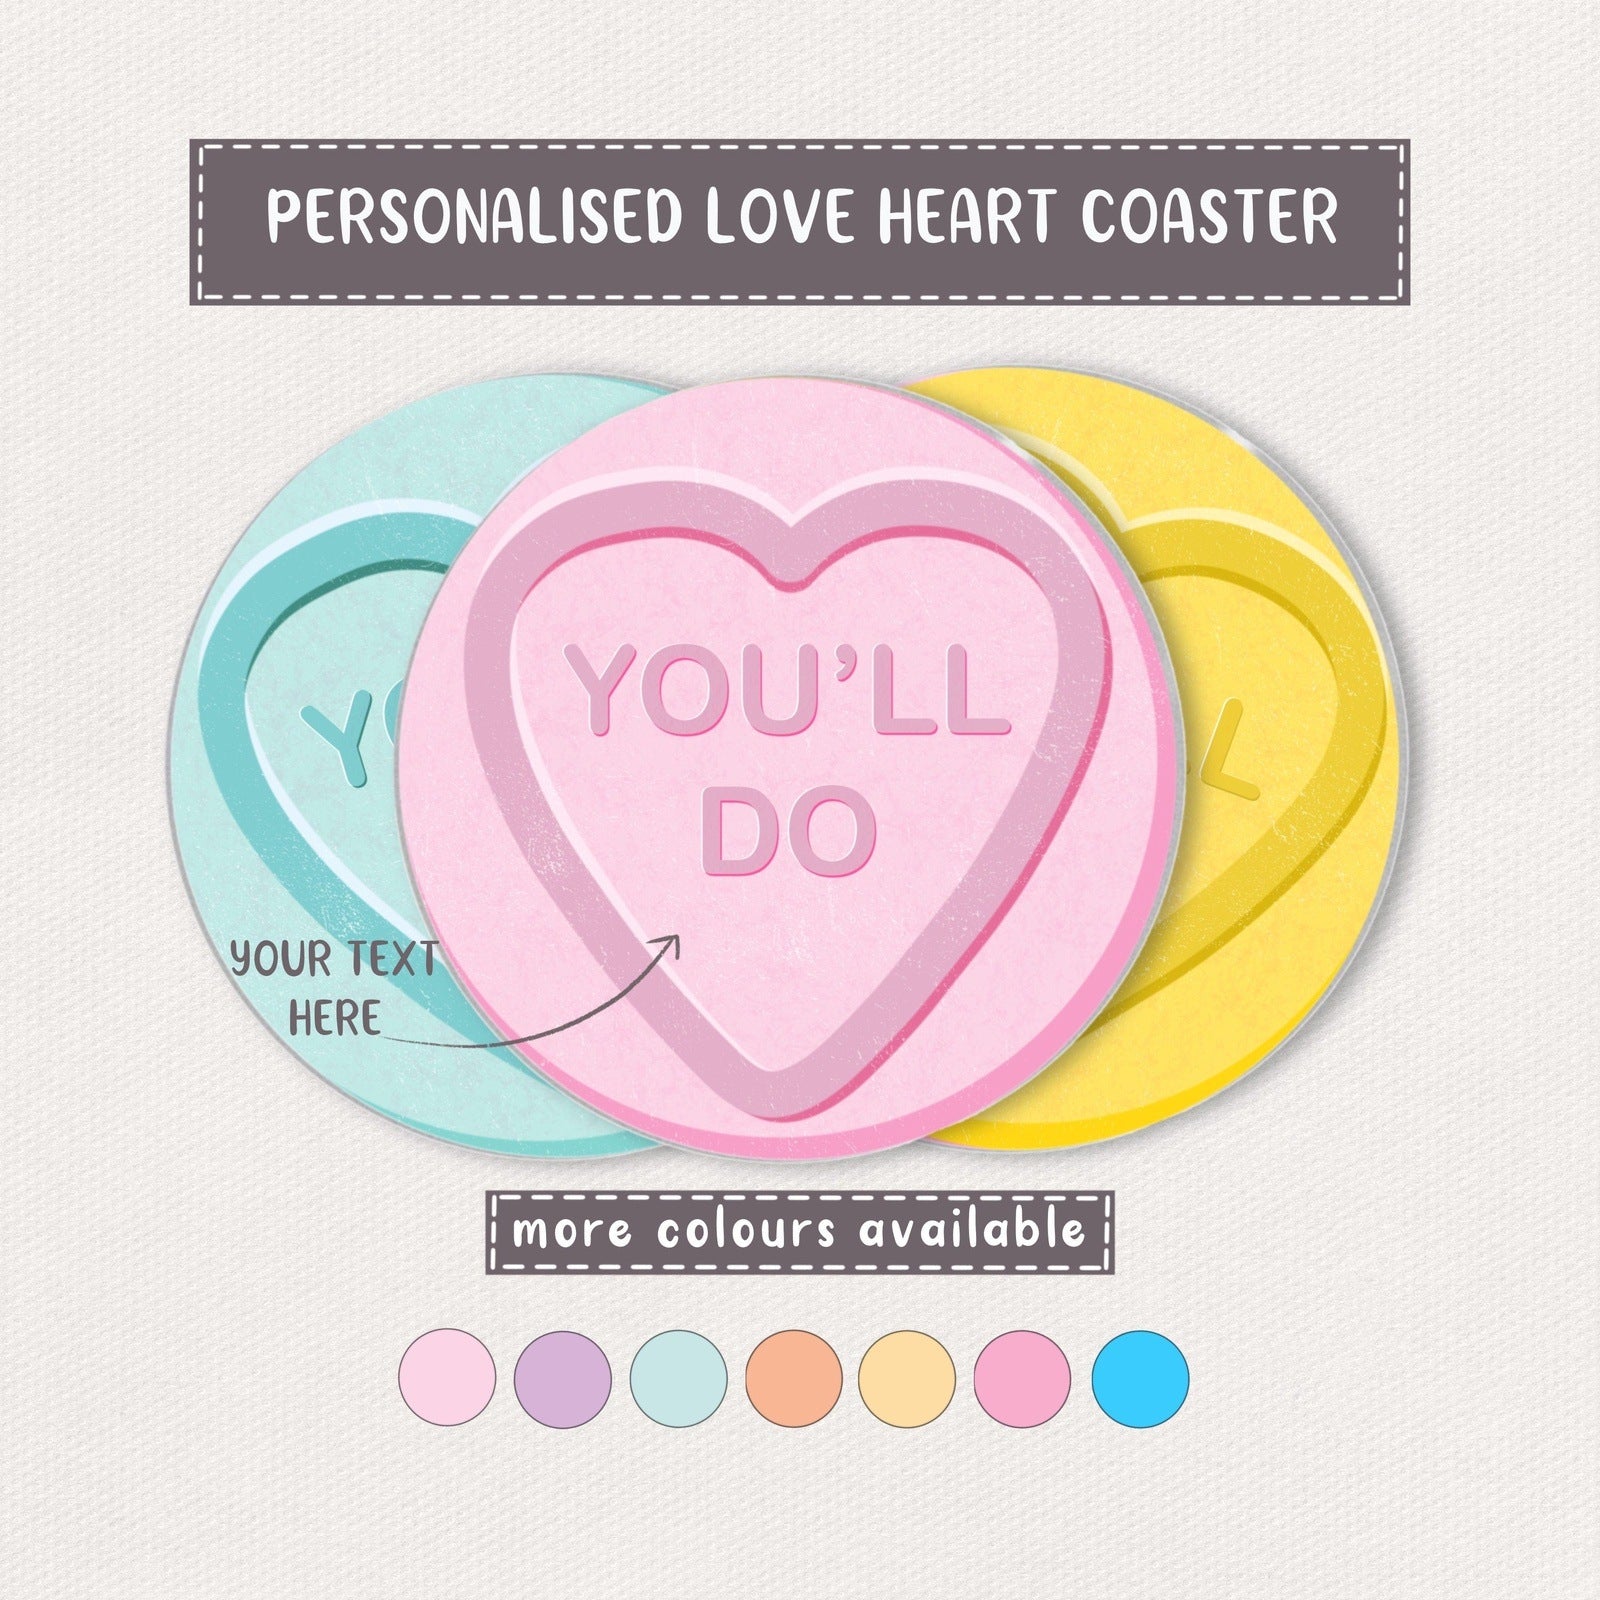 "You’ll Do" Personalised Love Heart Coaster